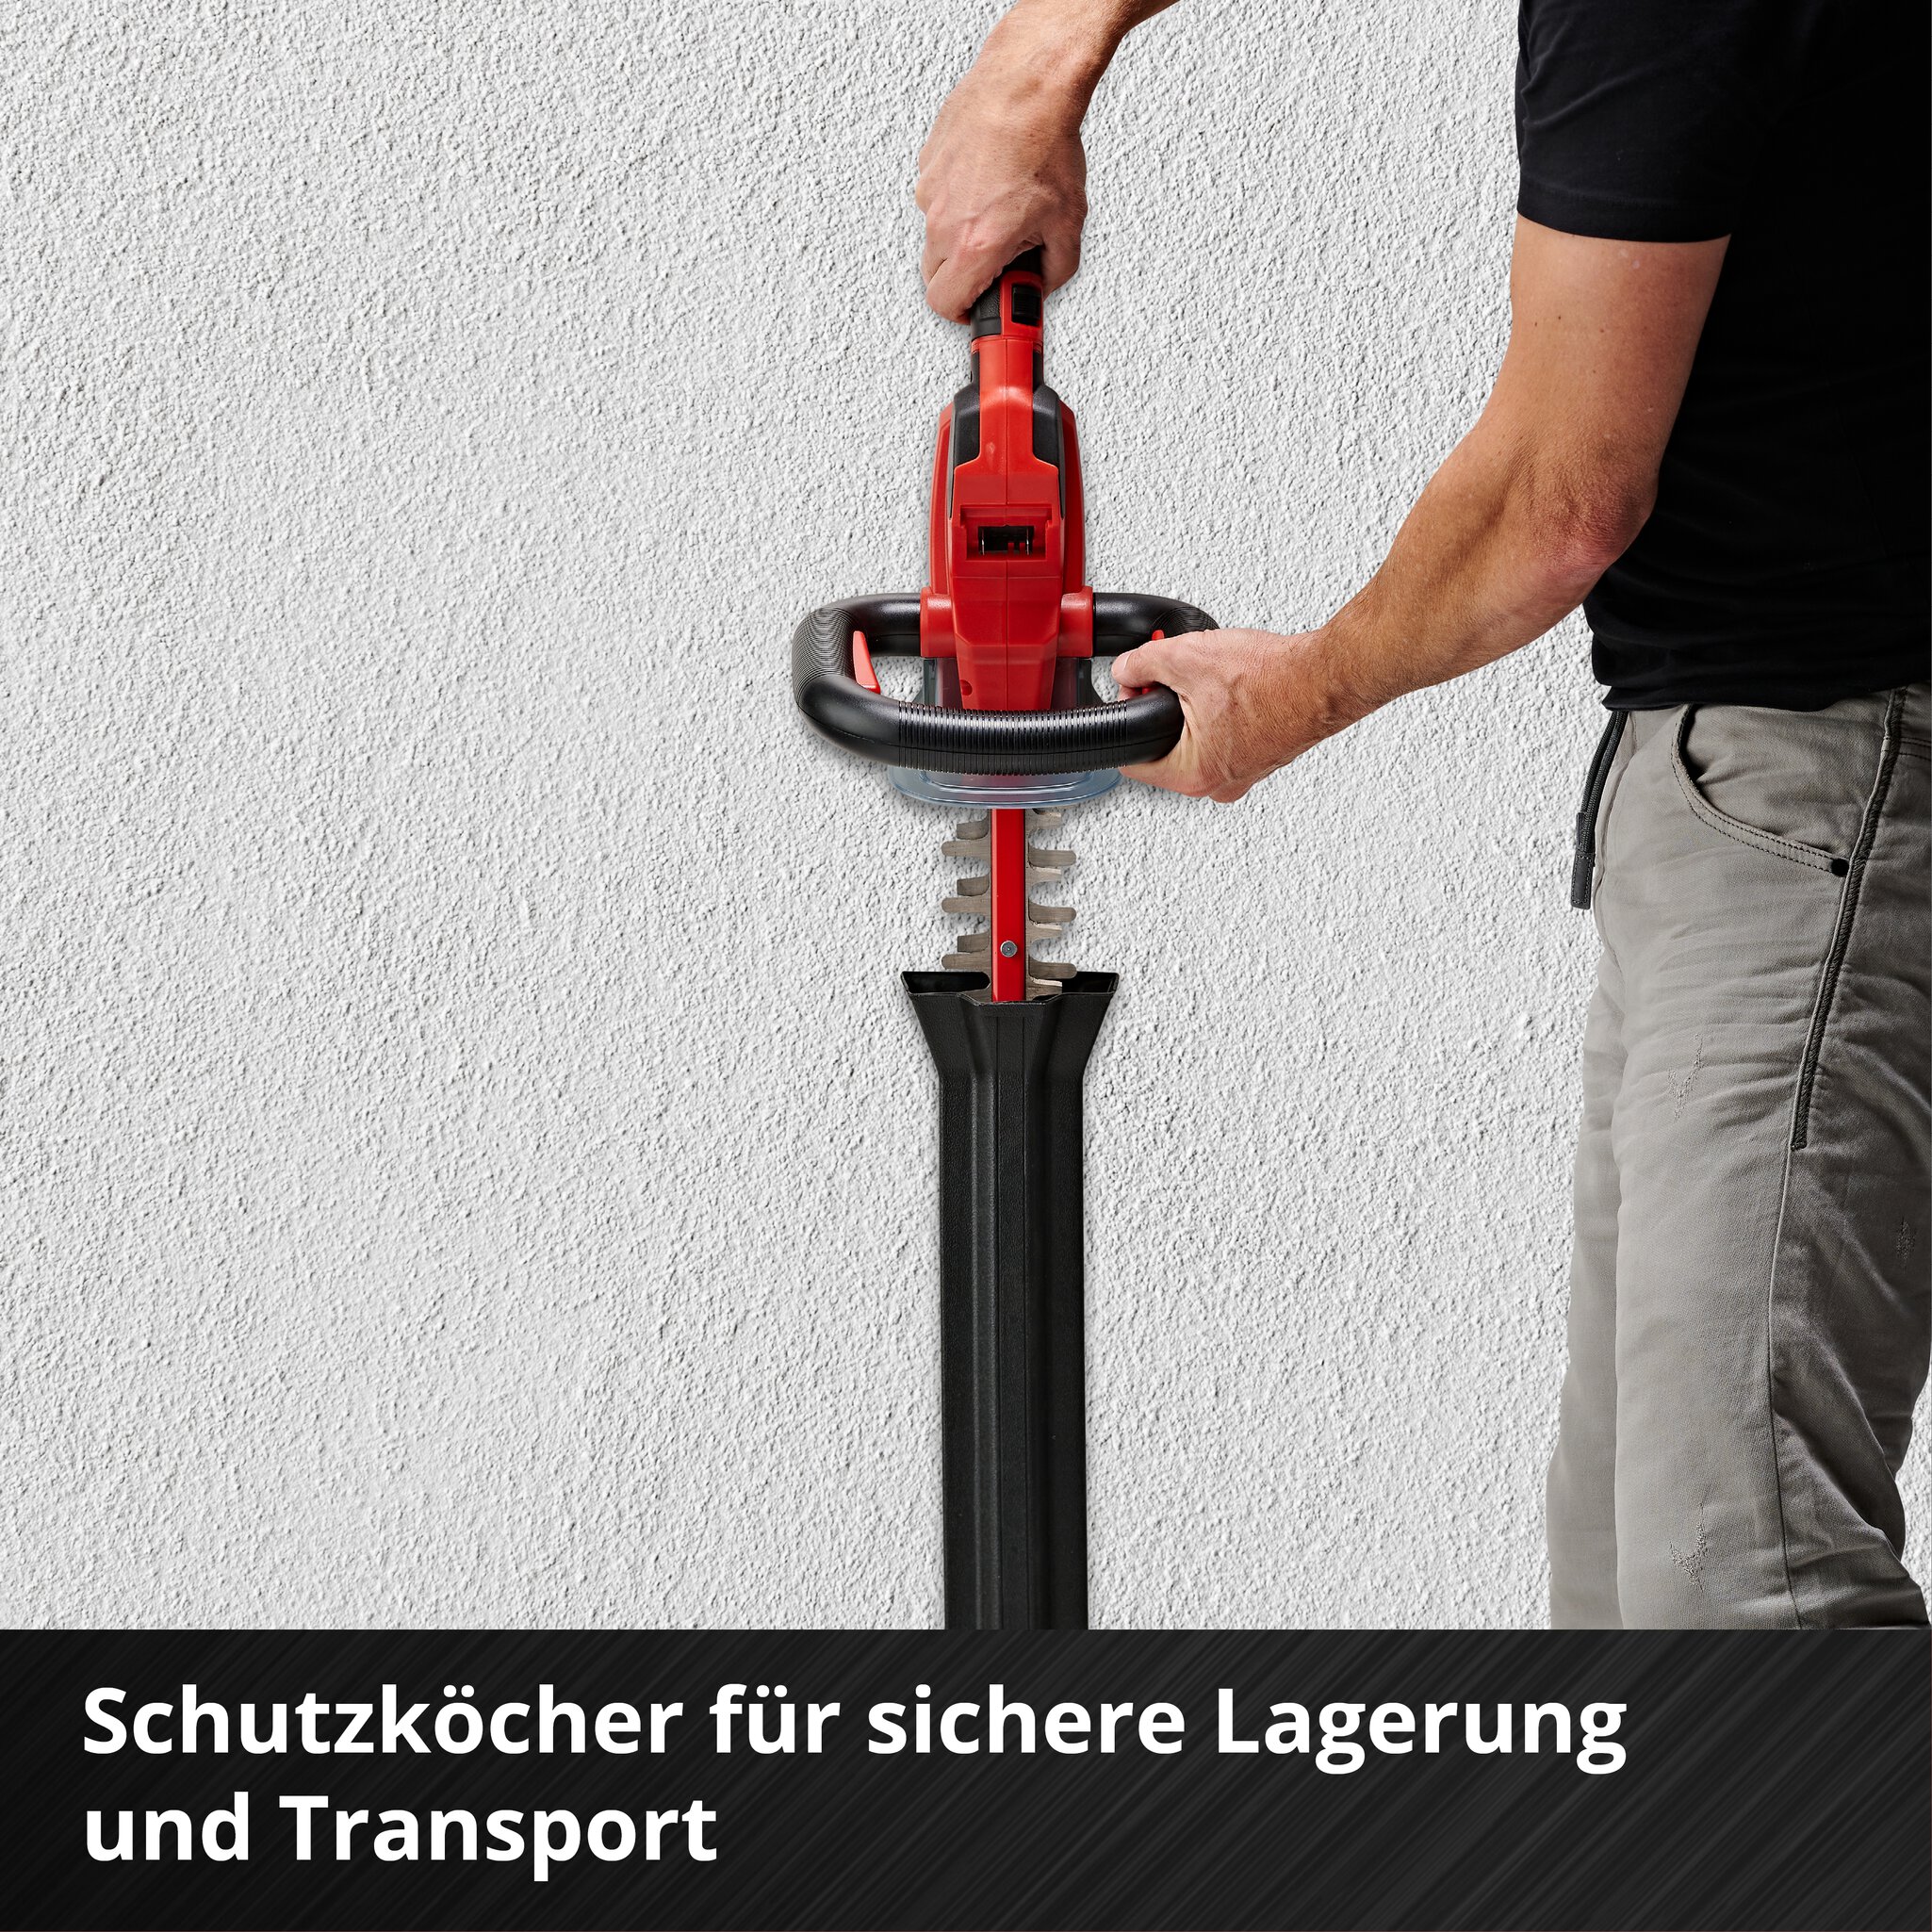 einhell-expert-cordless-hedge-trimmer-3410930-detail_image-007